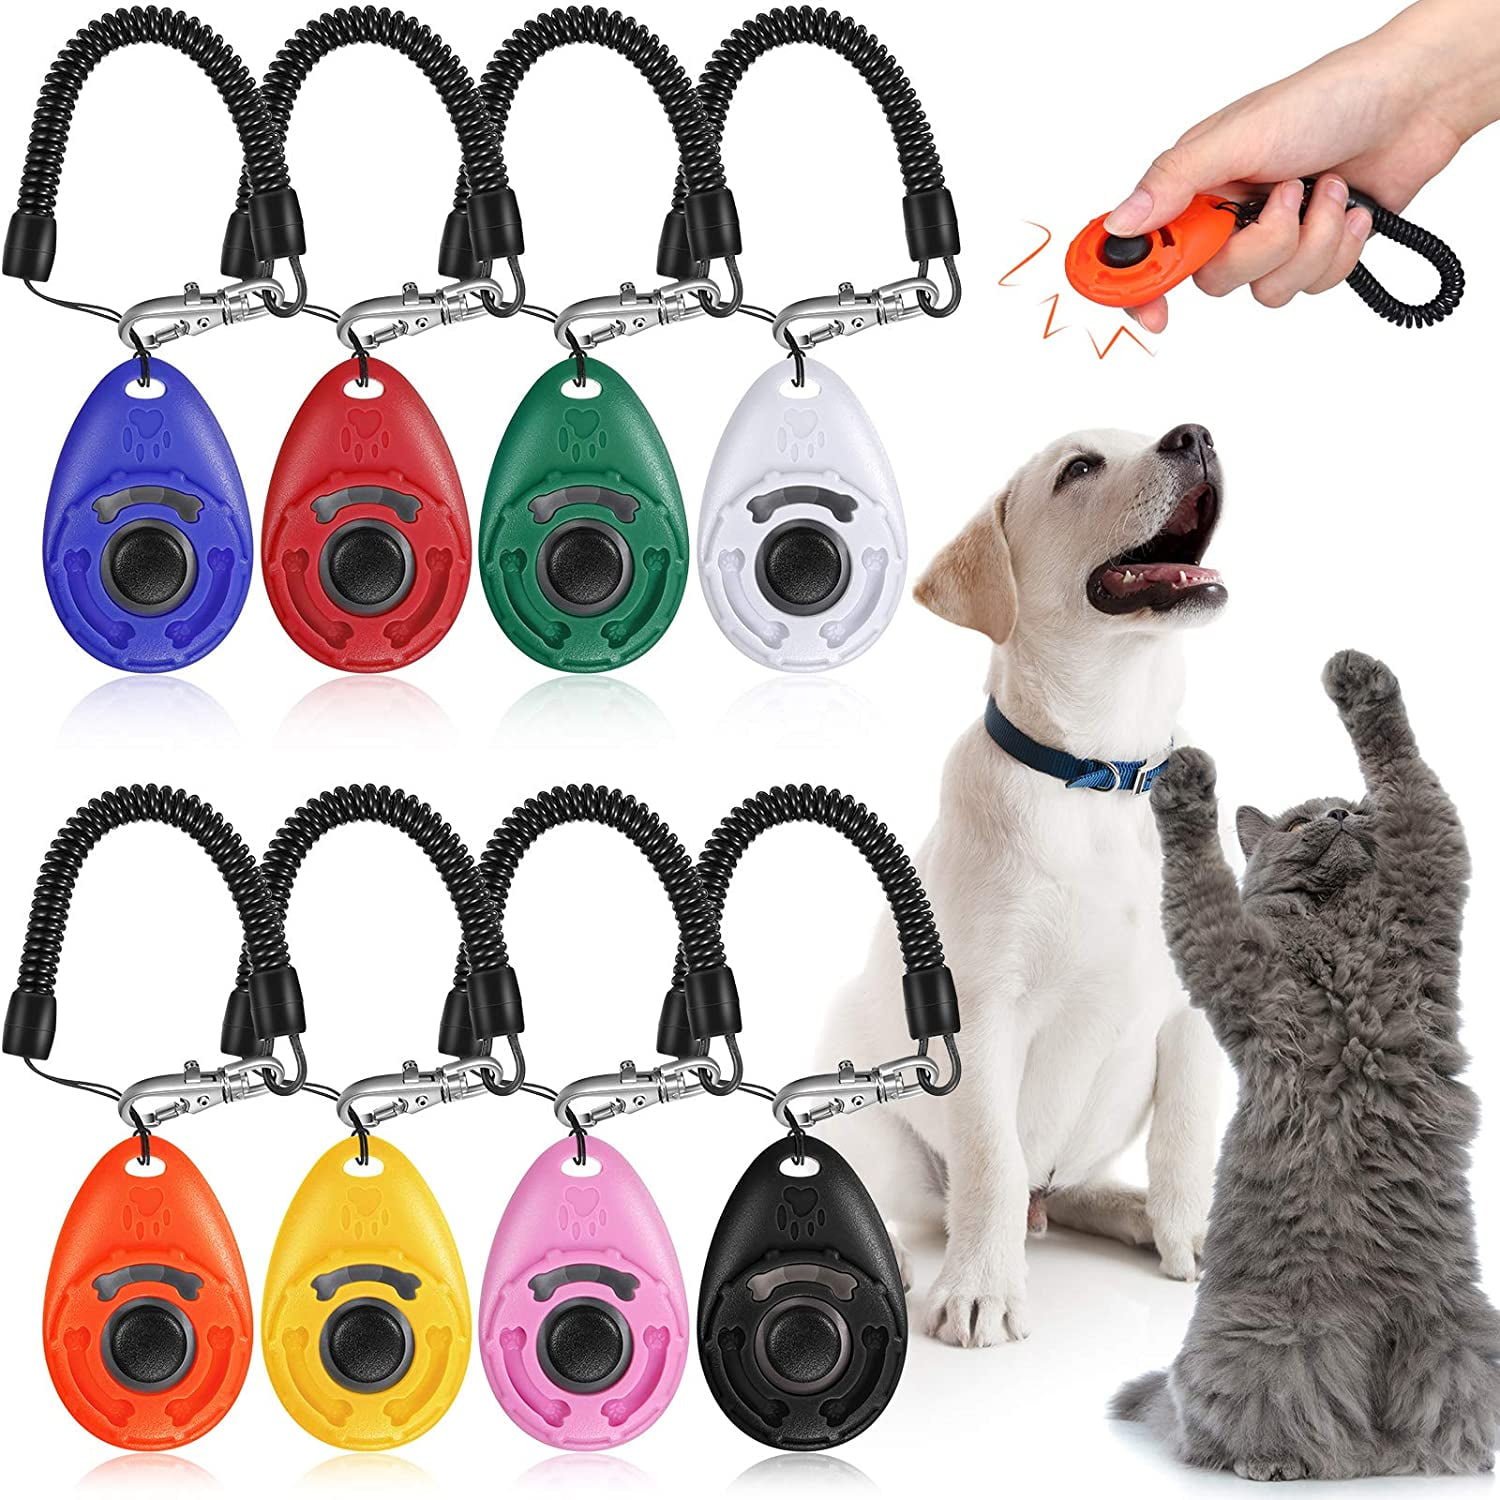 Big Button Training Clicker With Wrist Strap For Dog Cat Horse WIN 3Pcs Pet Dog Clicker 